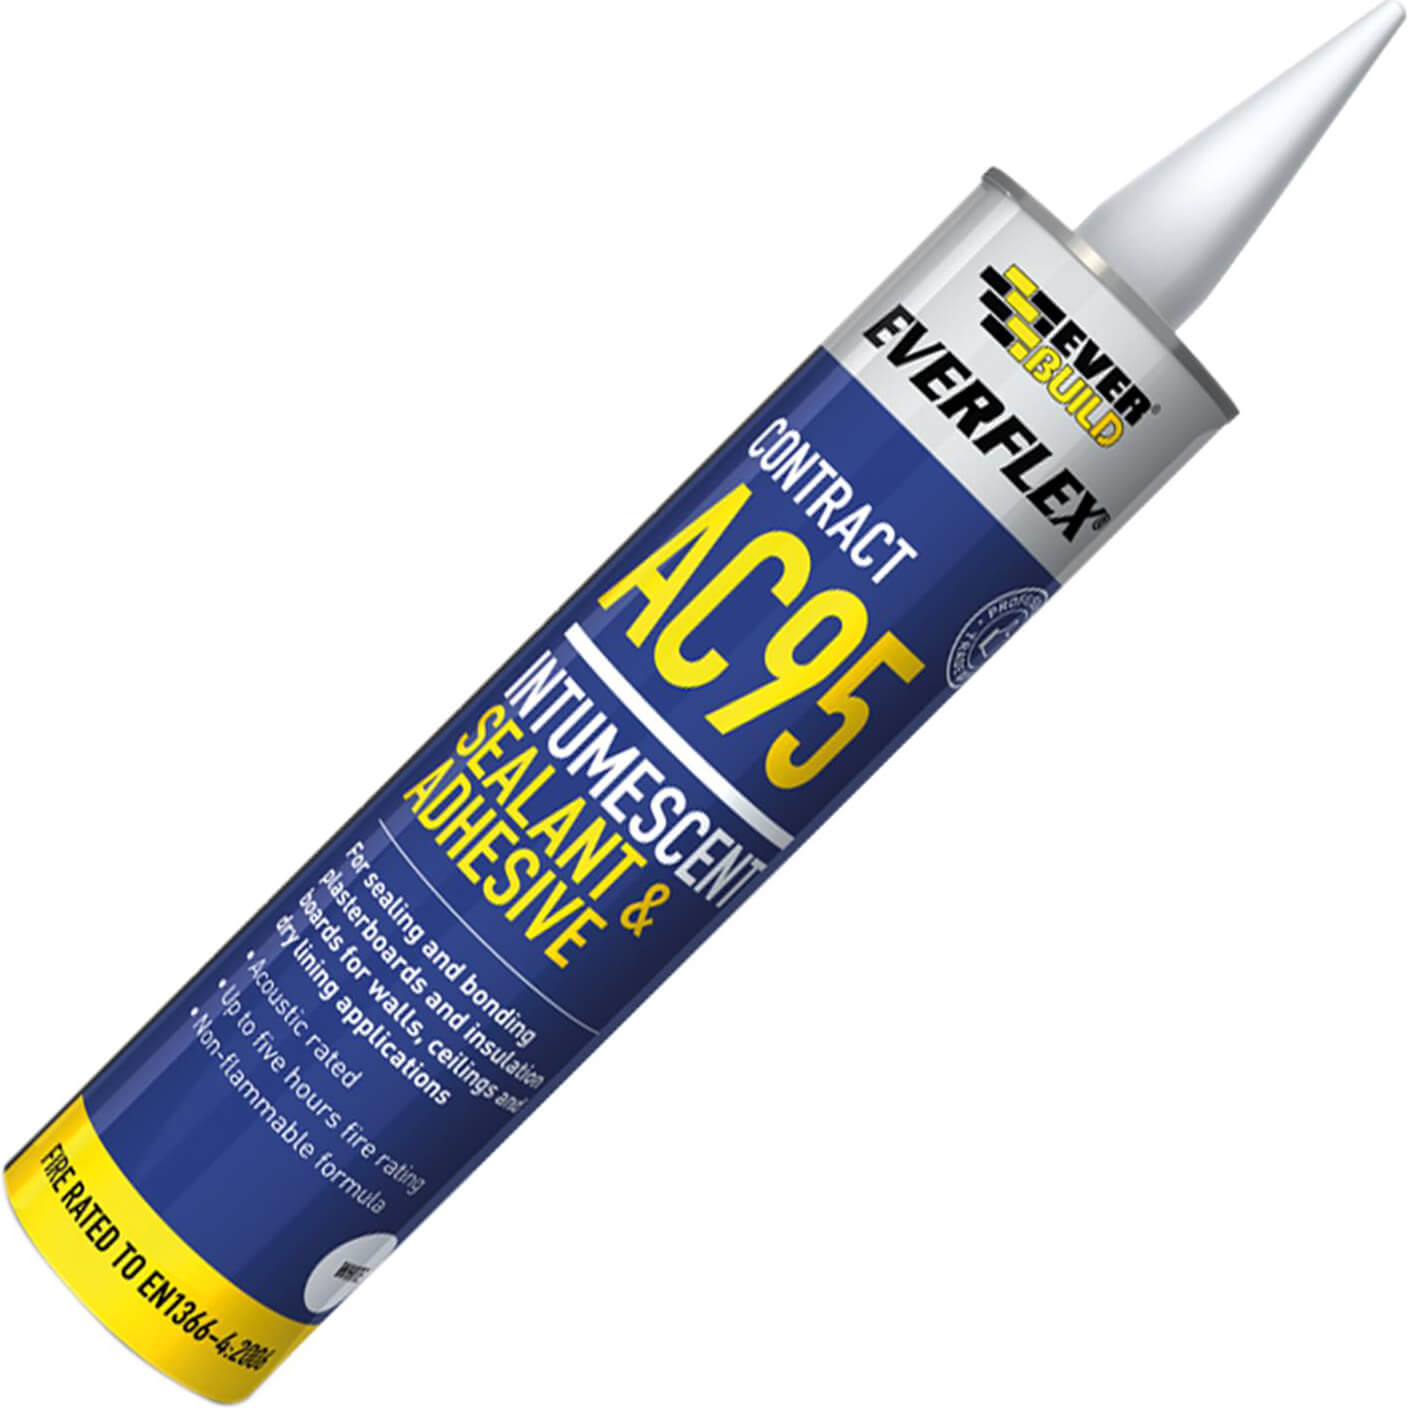 Image of Everbuild Intumescent Acoustic Sealant 900ml